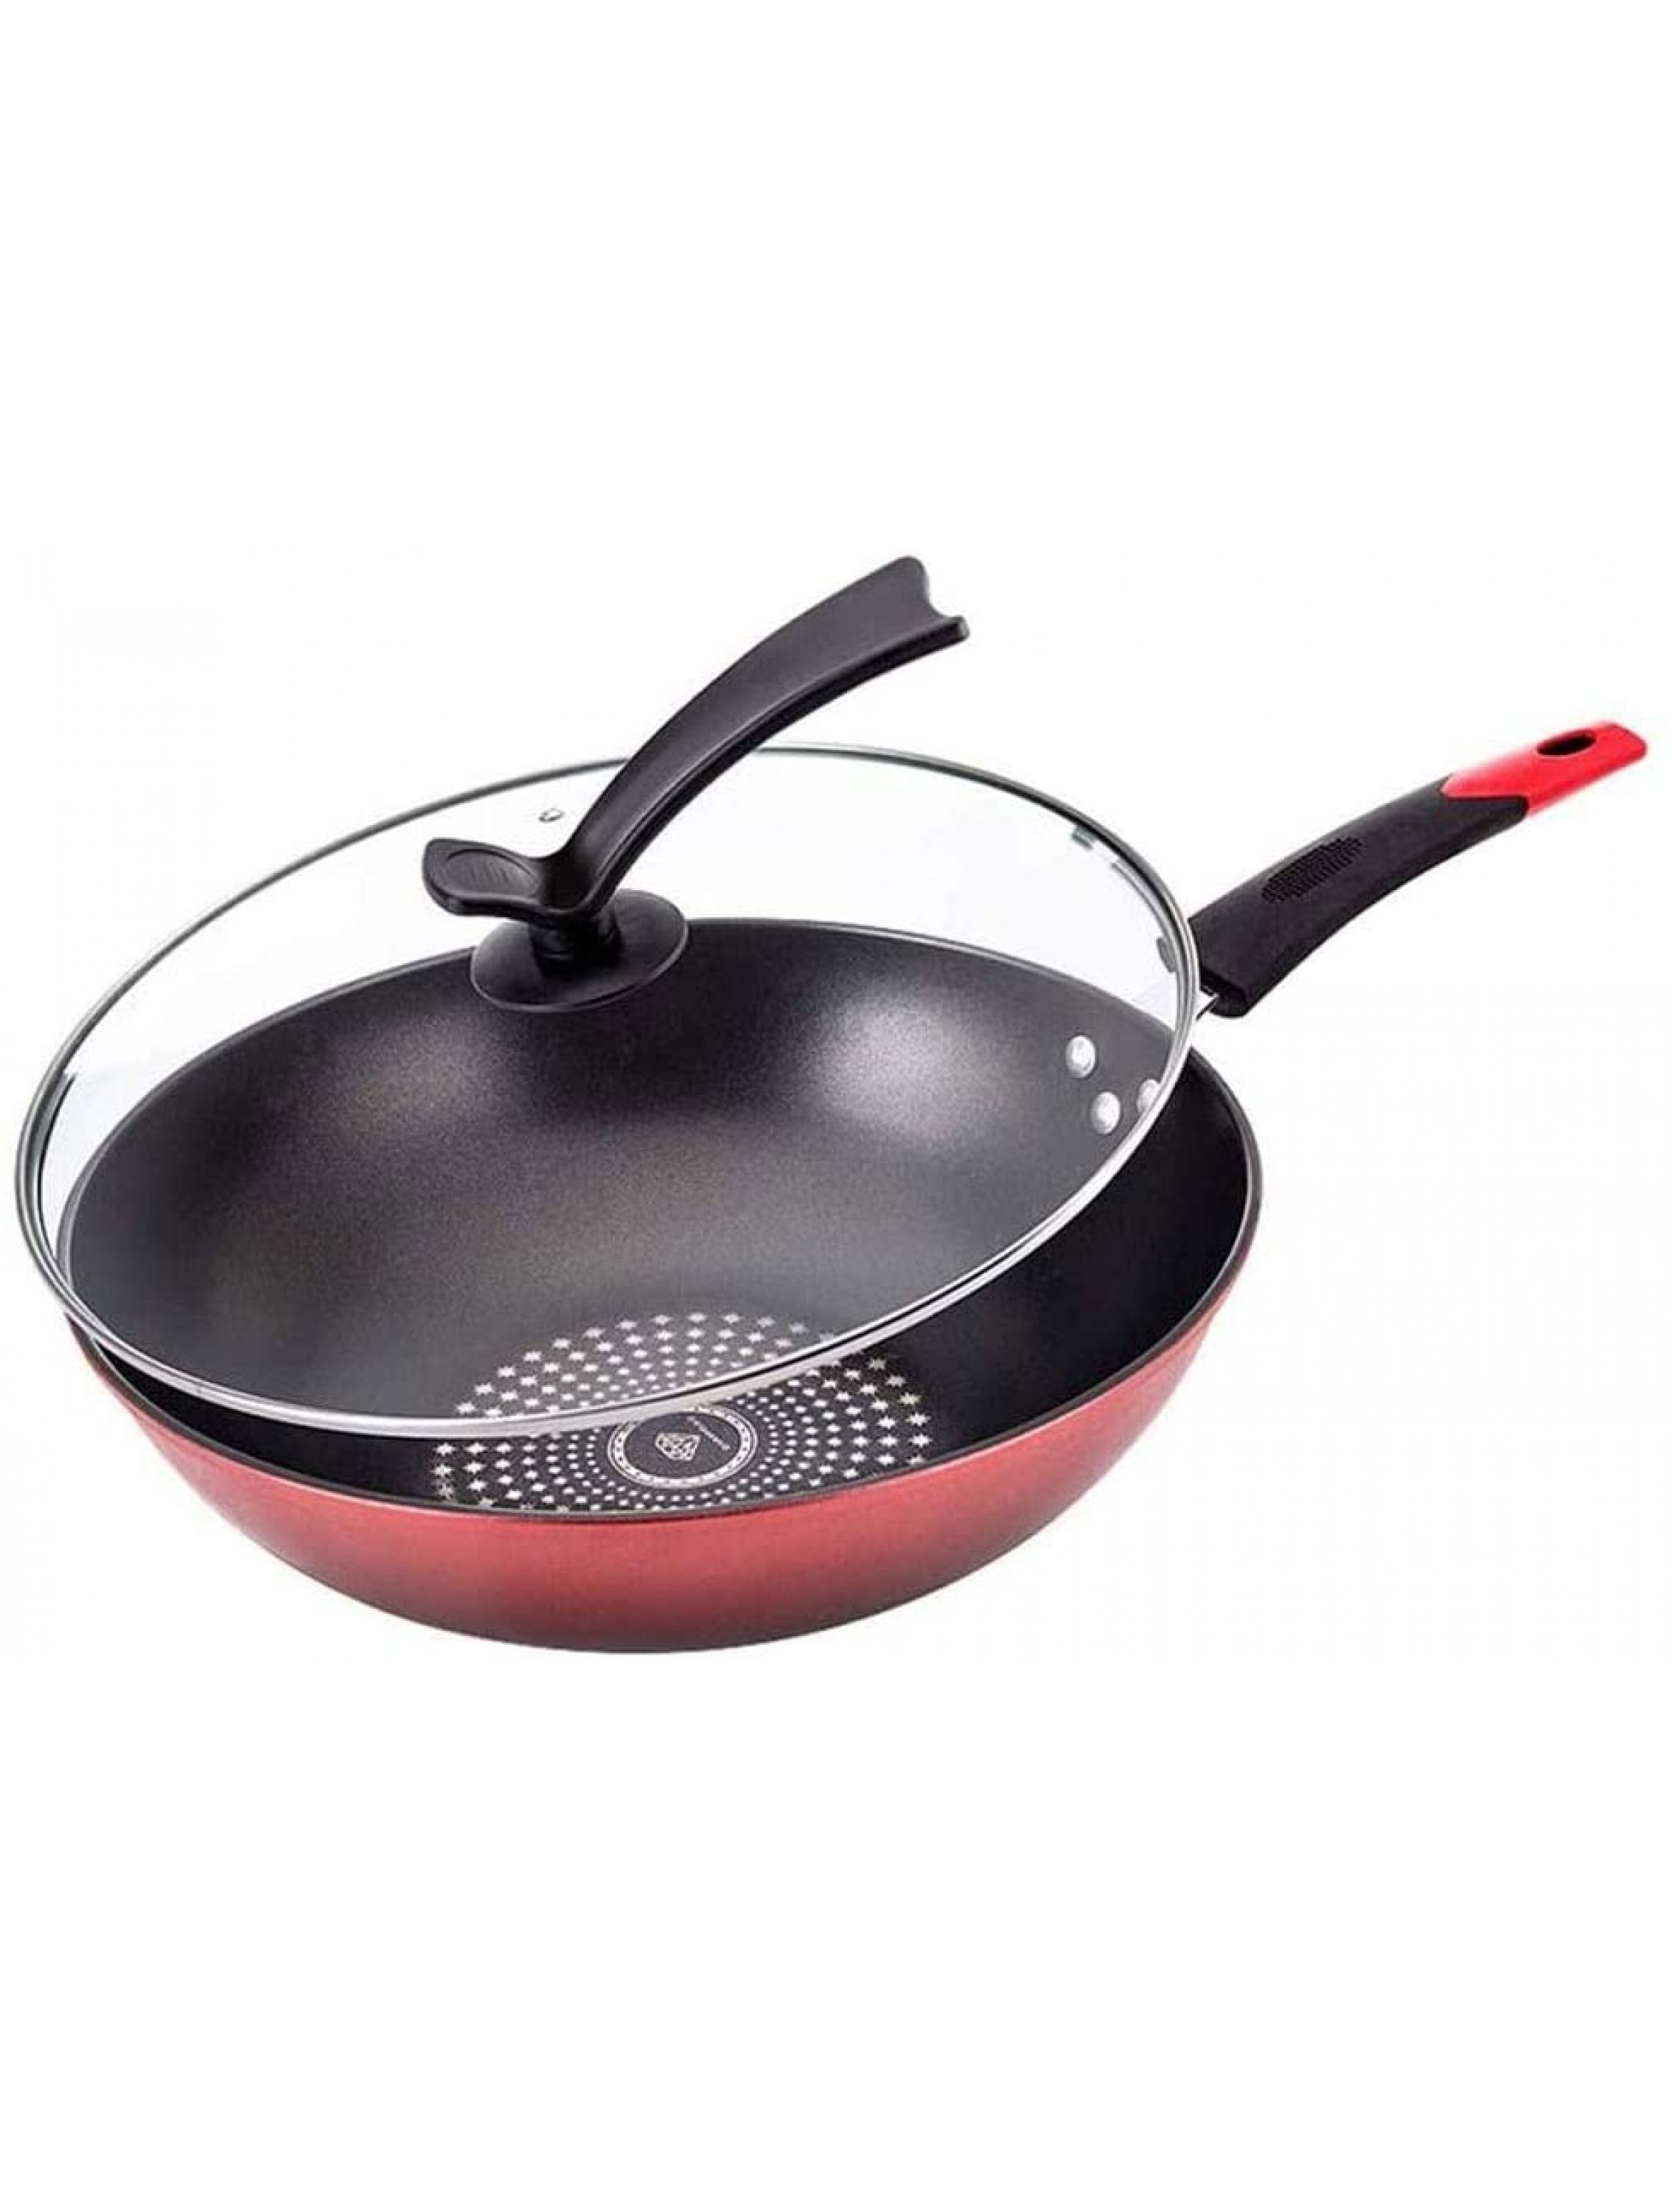 YCZDG with Cover Stainless Steel Wok Non-Stick Pan Full Screen Honeycomb Design No Lampblack No Coating Frying Pan Stainless Steel Frying - B8LF5OUPL